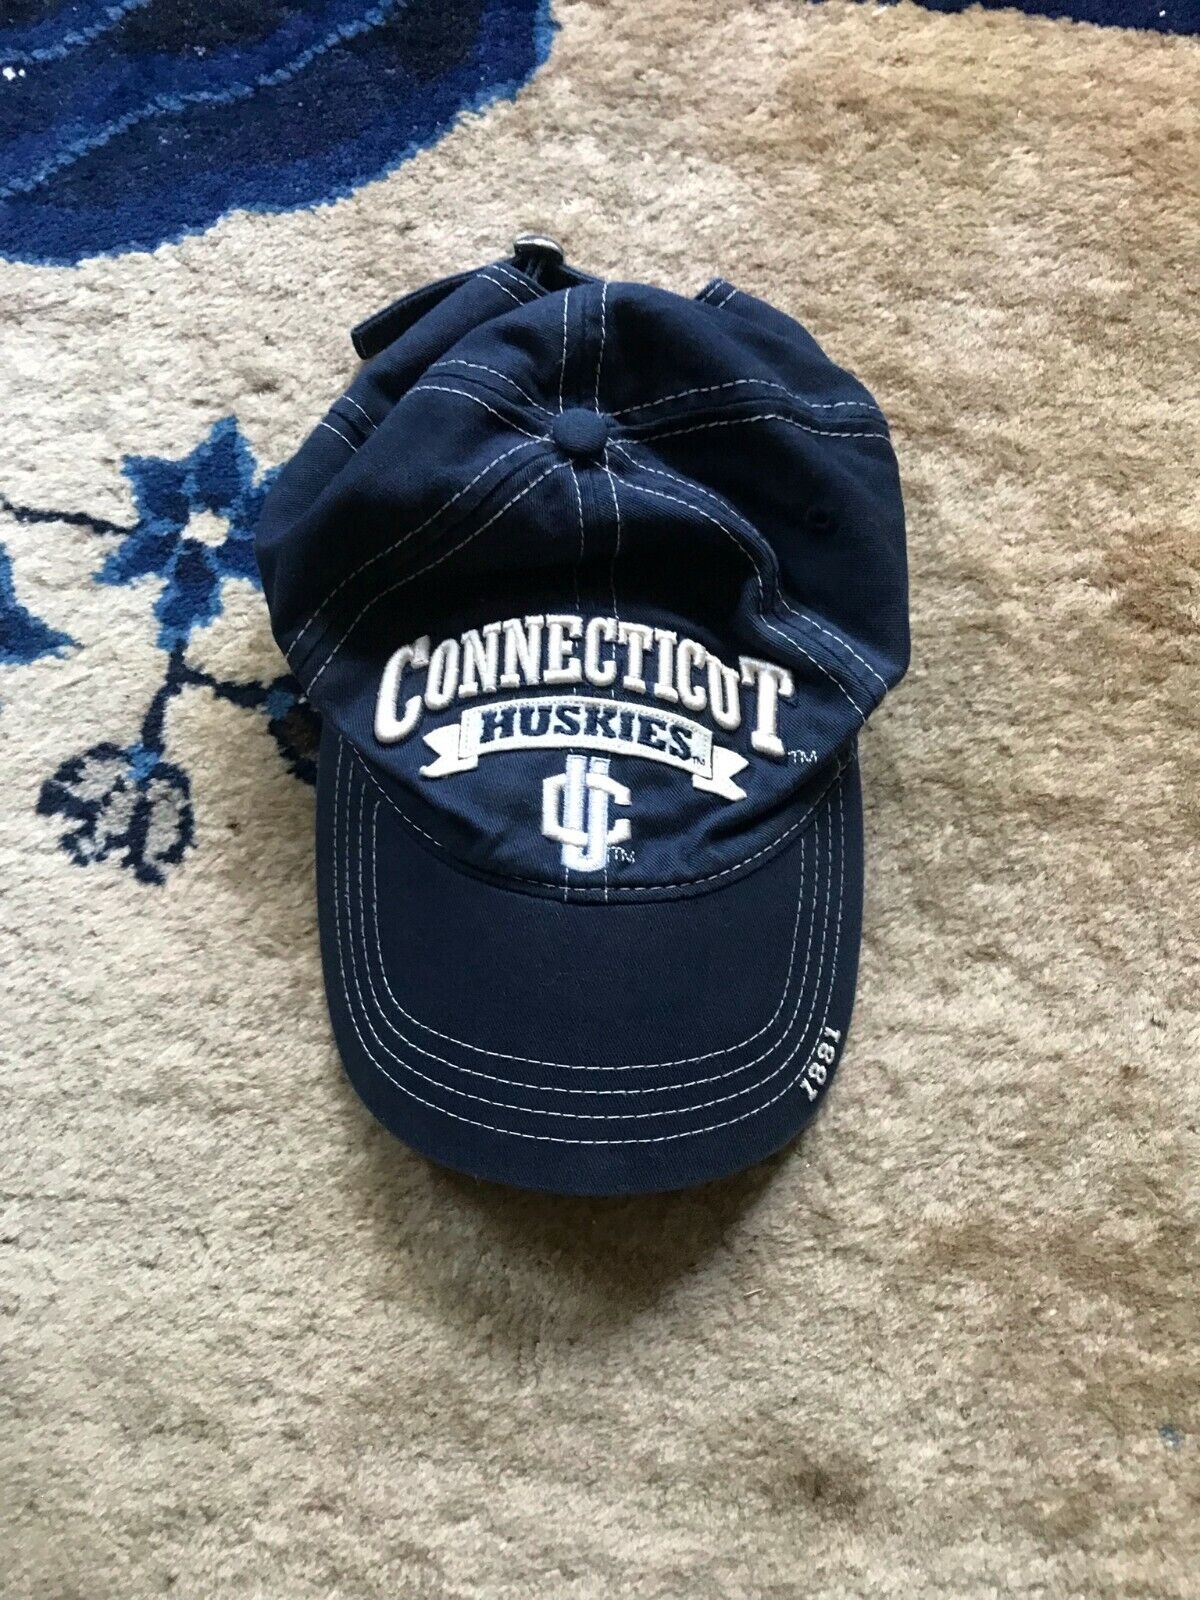 Vintage Official Connecticut Huskies Embroidered Logo Hat ESPN College Gameday